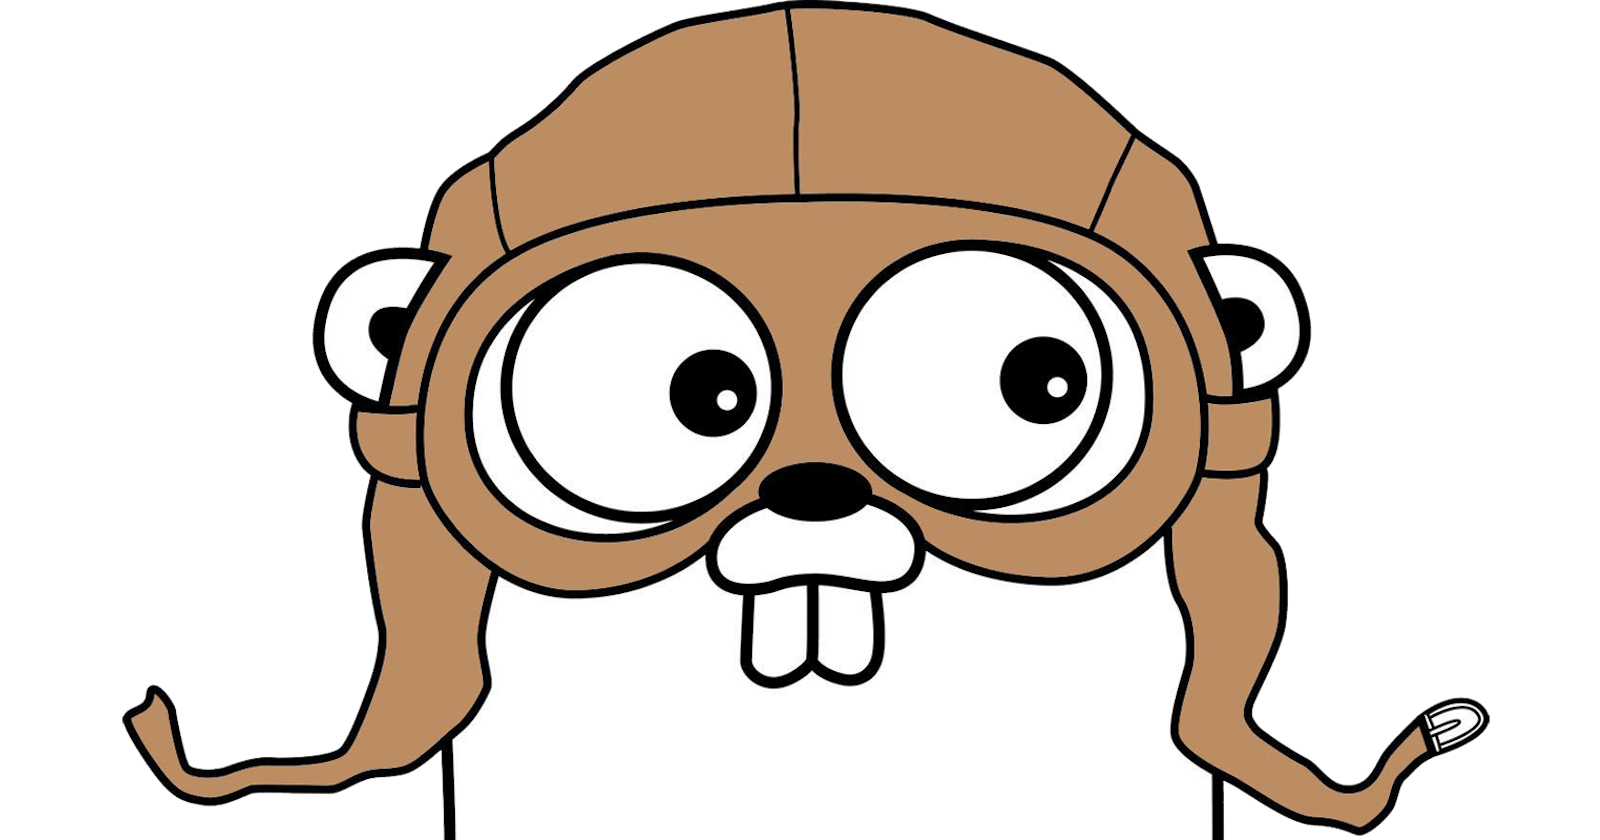 How to set up a development environment for Golang?